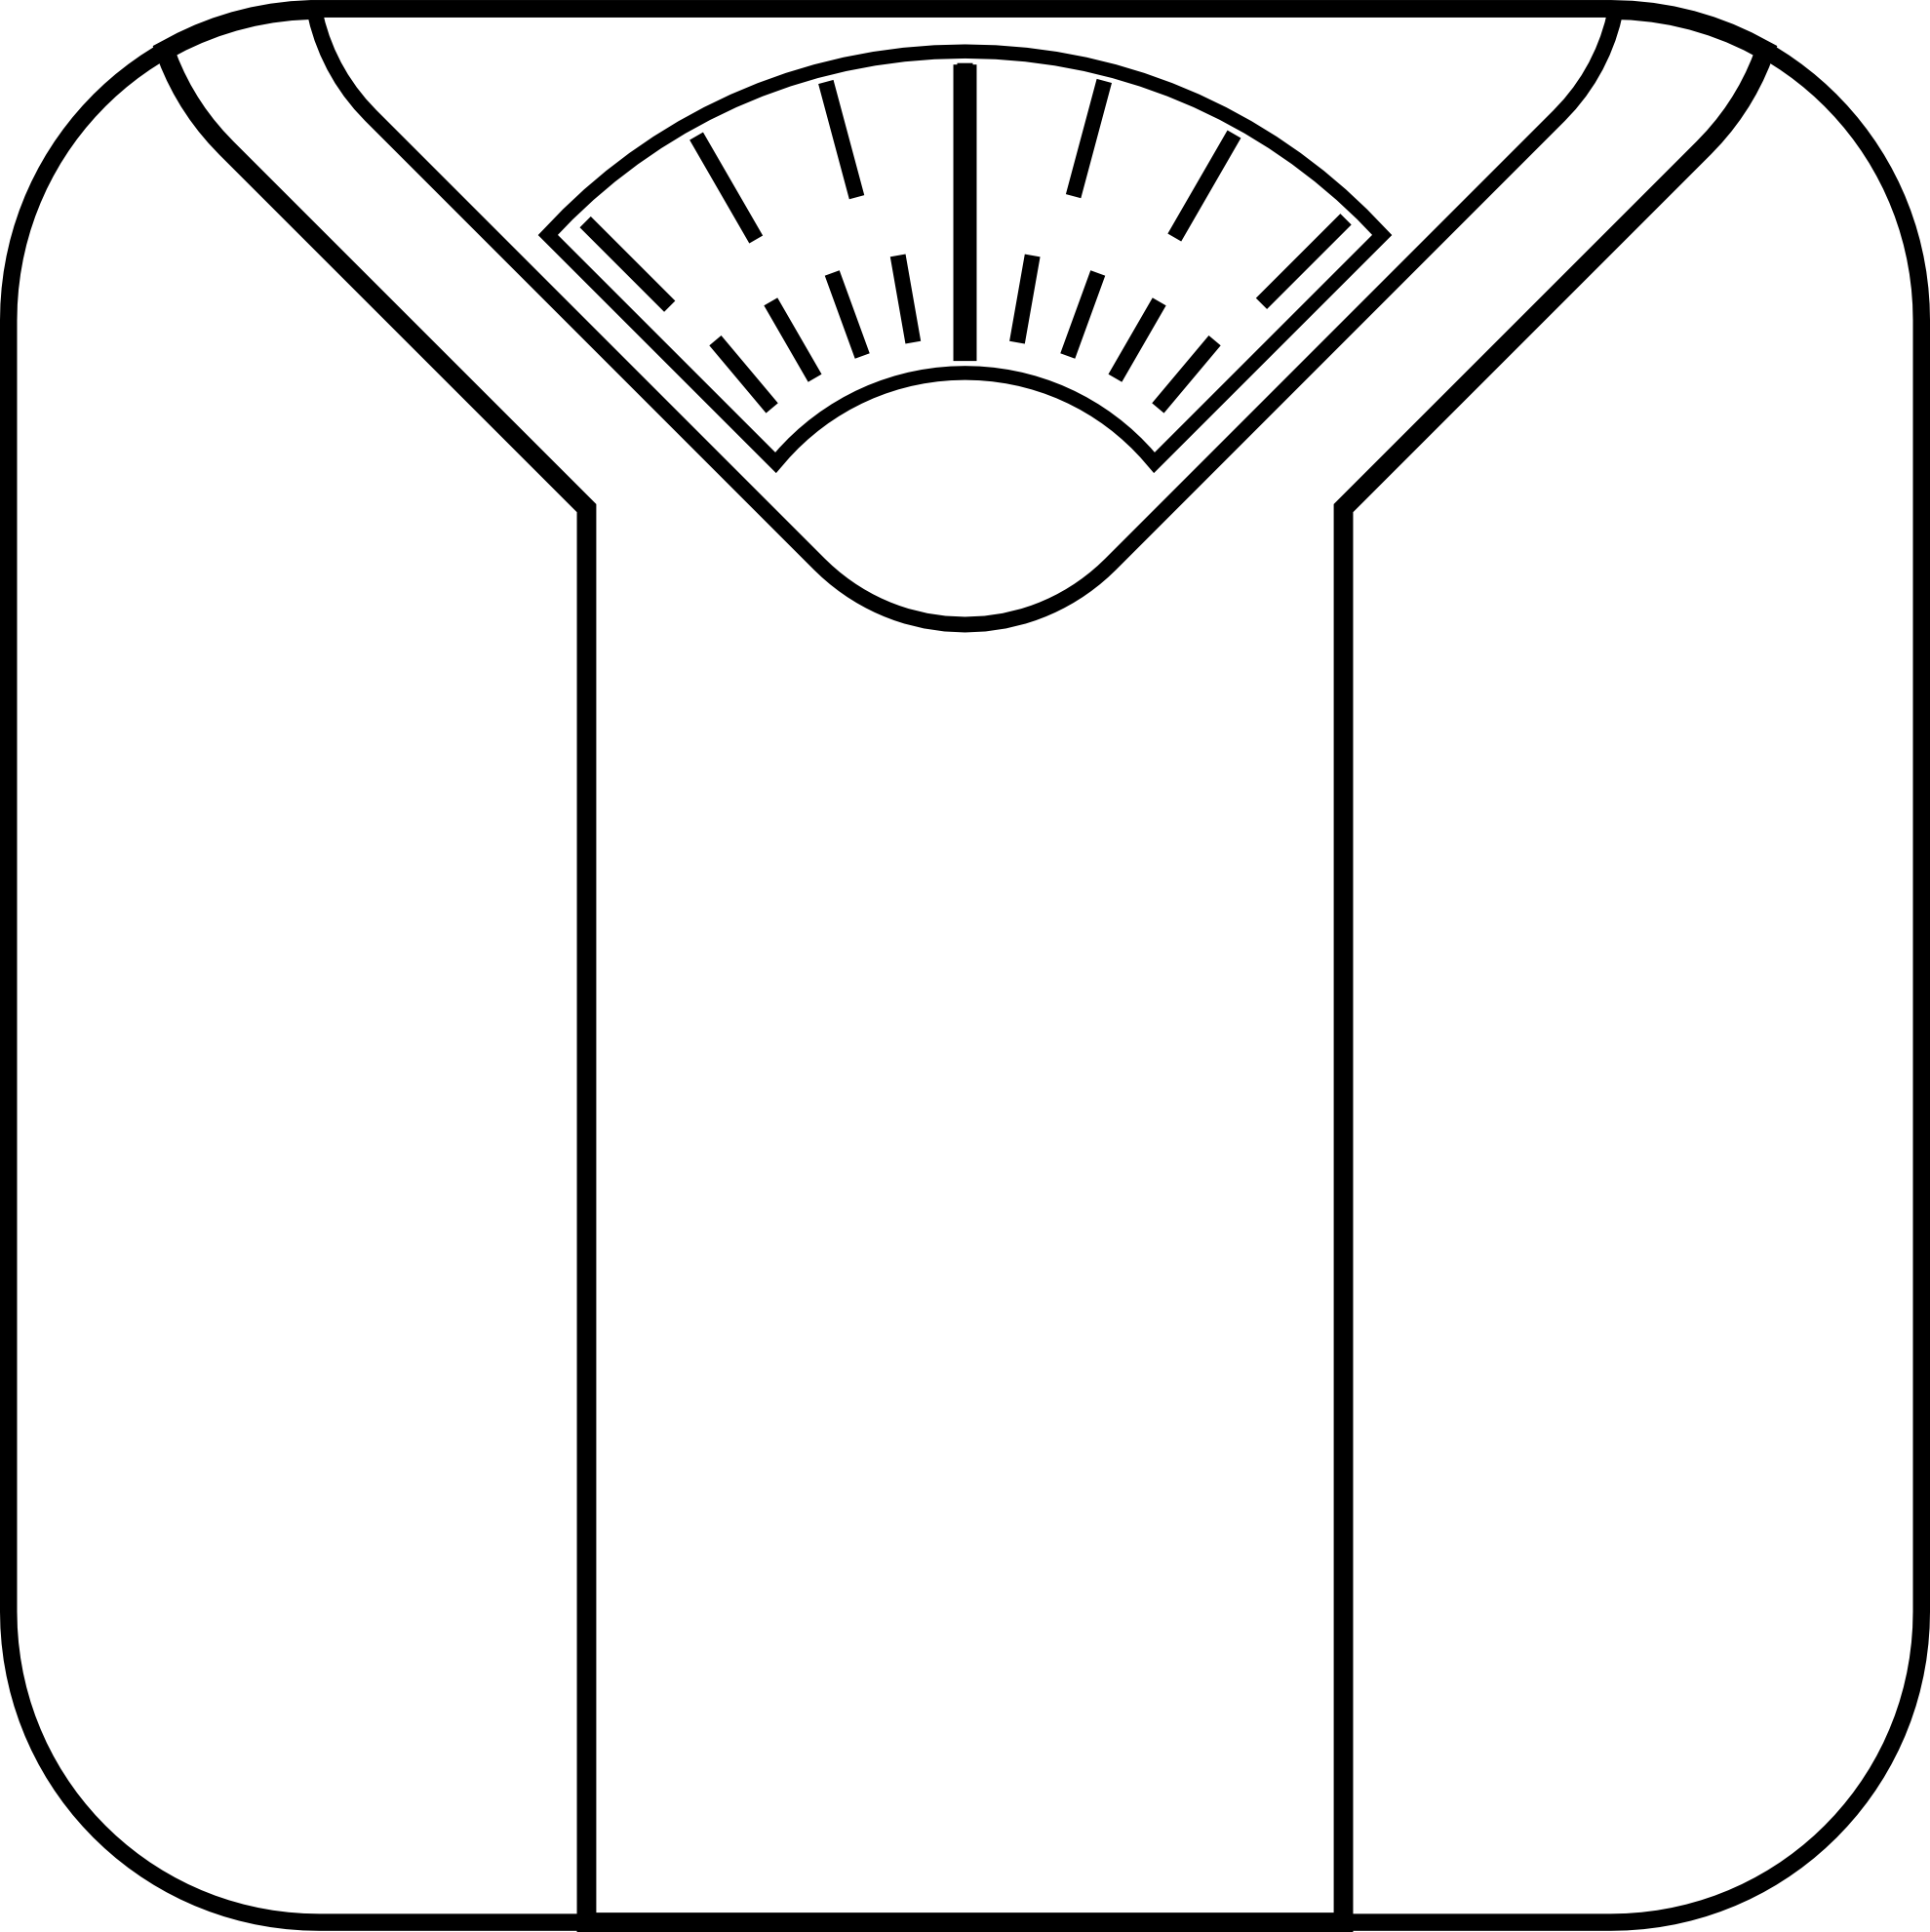 bathroom_scale_black_white_line_art_coloring_book_colouring-1979px.png  (1979×1981) | Free clip art, Clip art, Coloring books